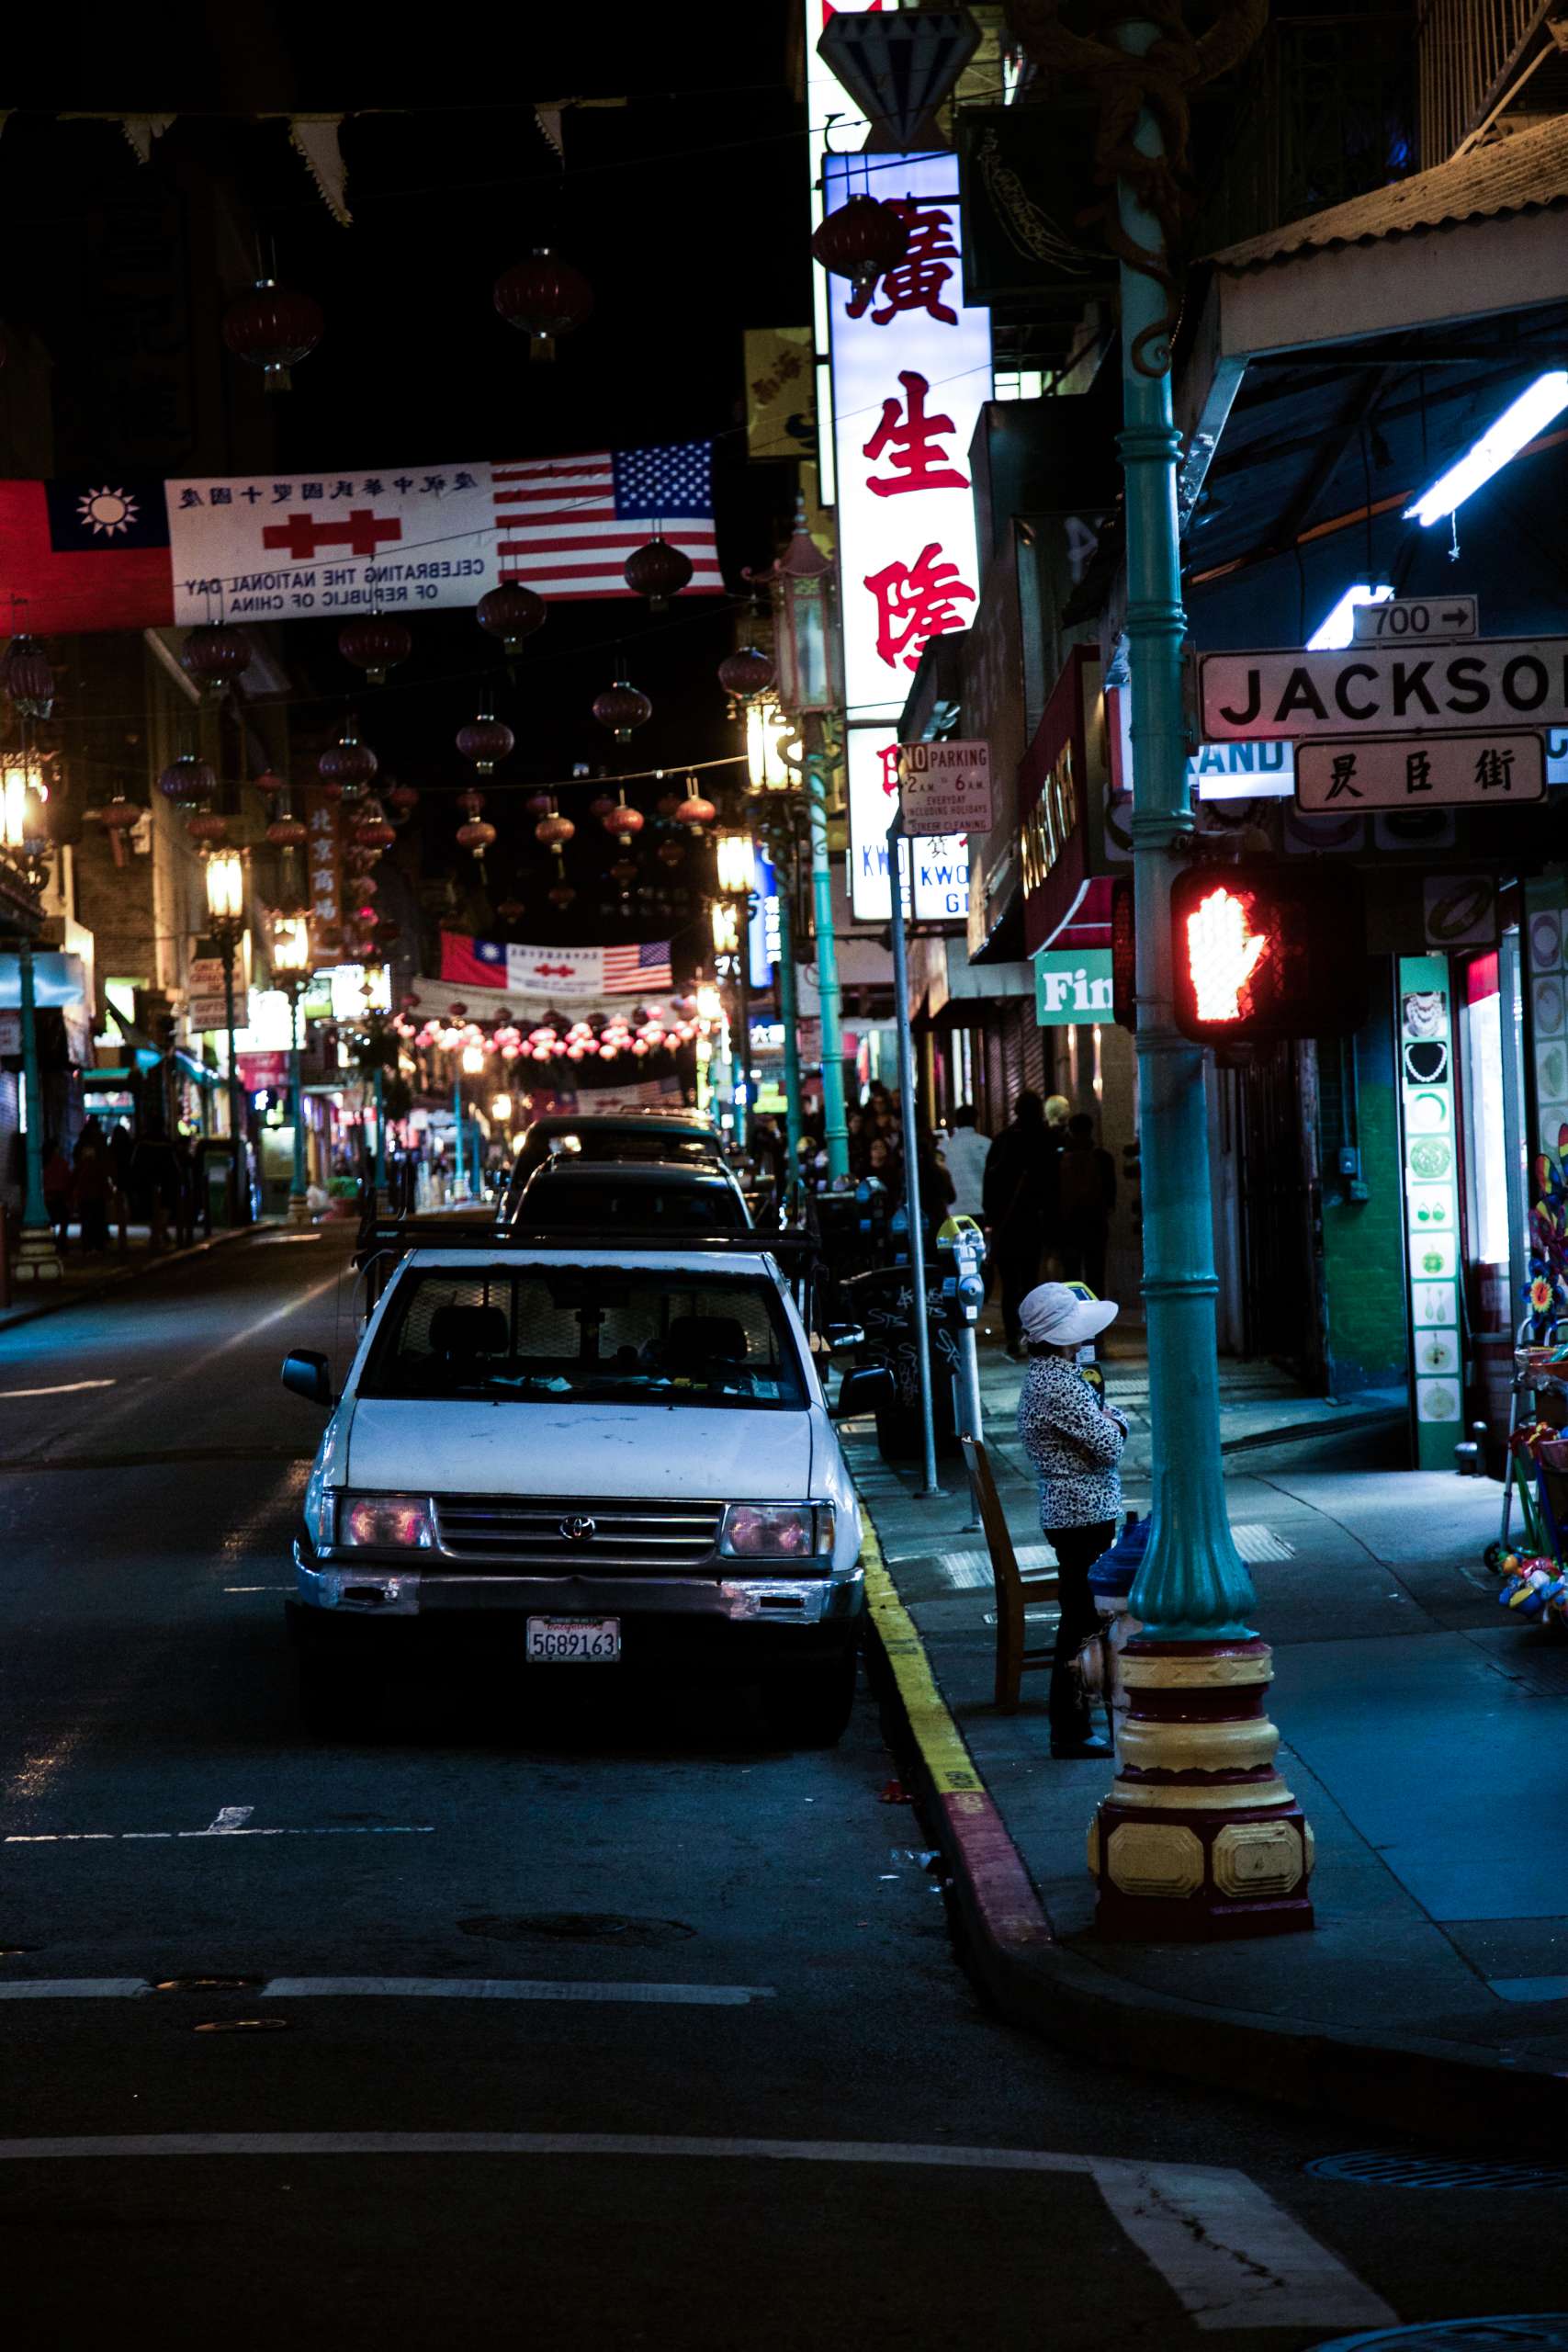 Empty car sits in China town at night.